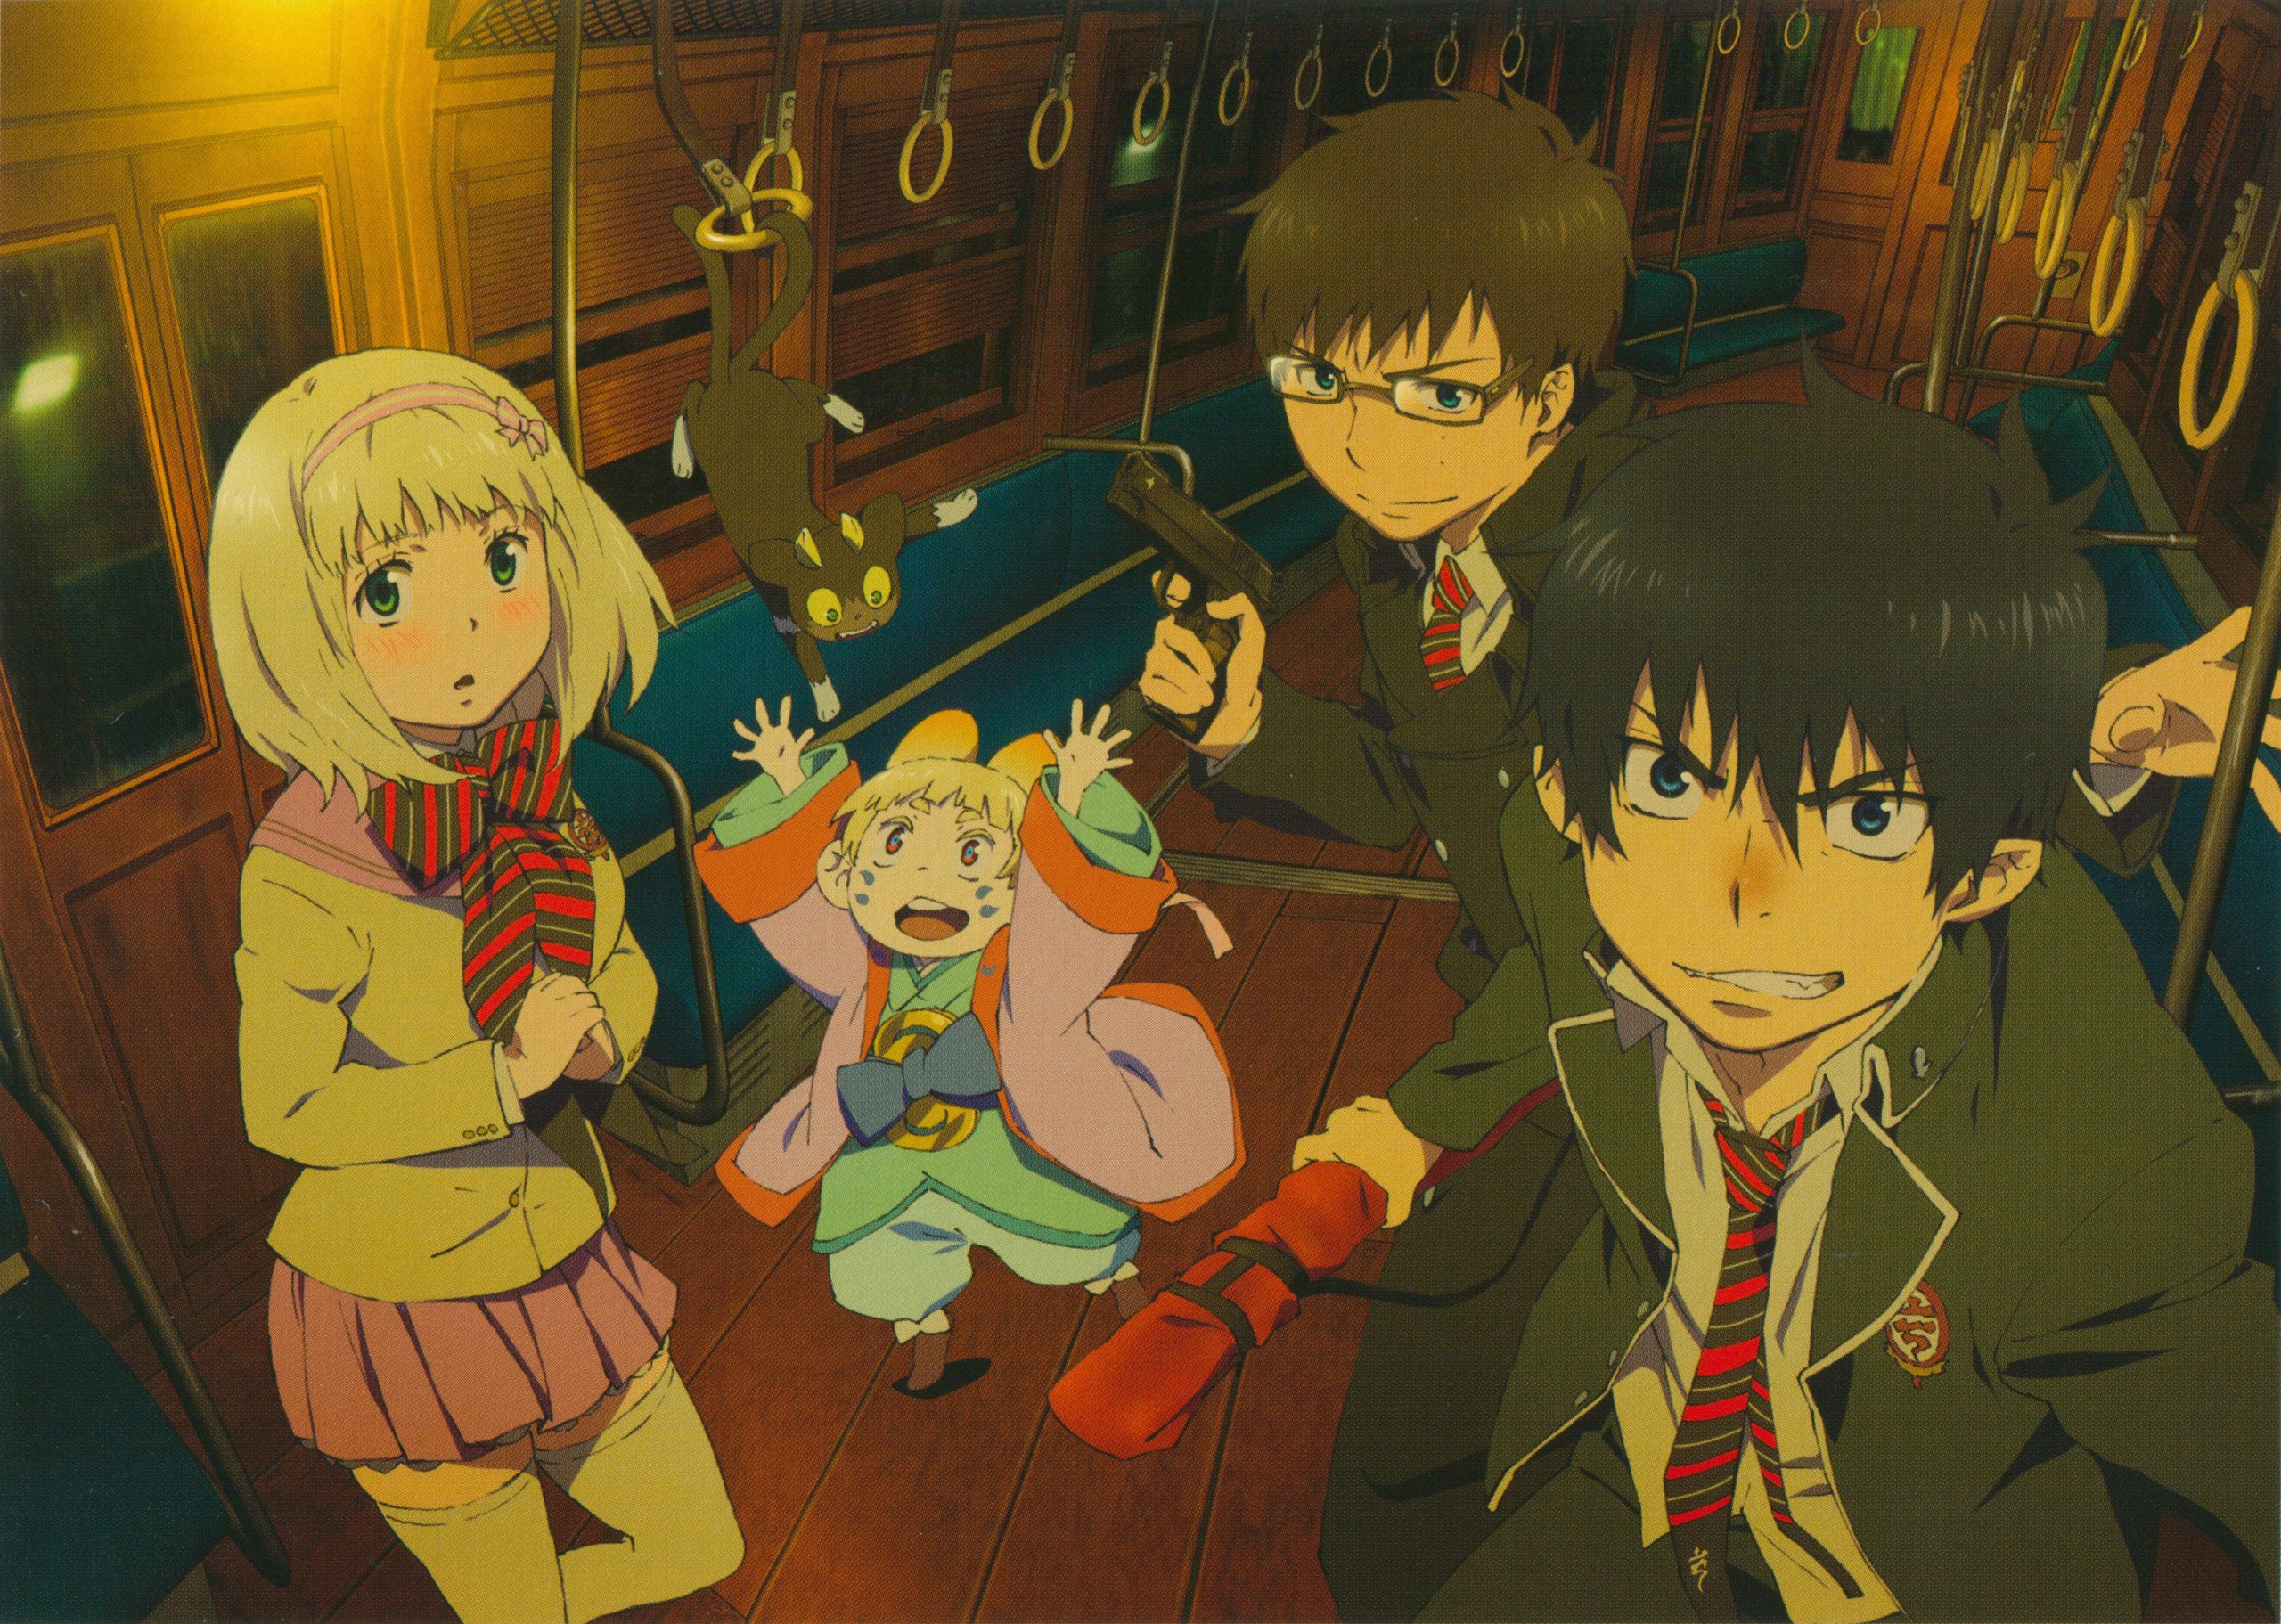 ao no exorcist download anime torrents